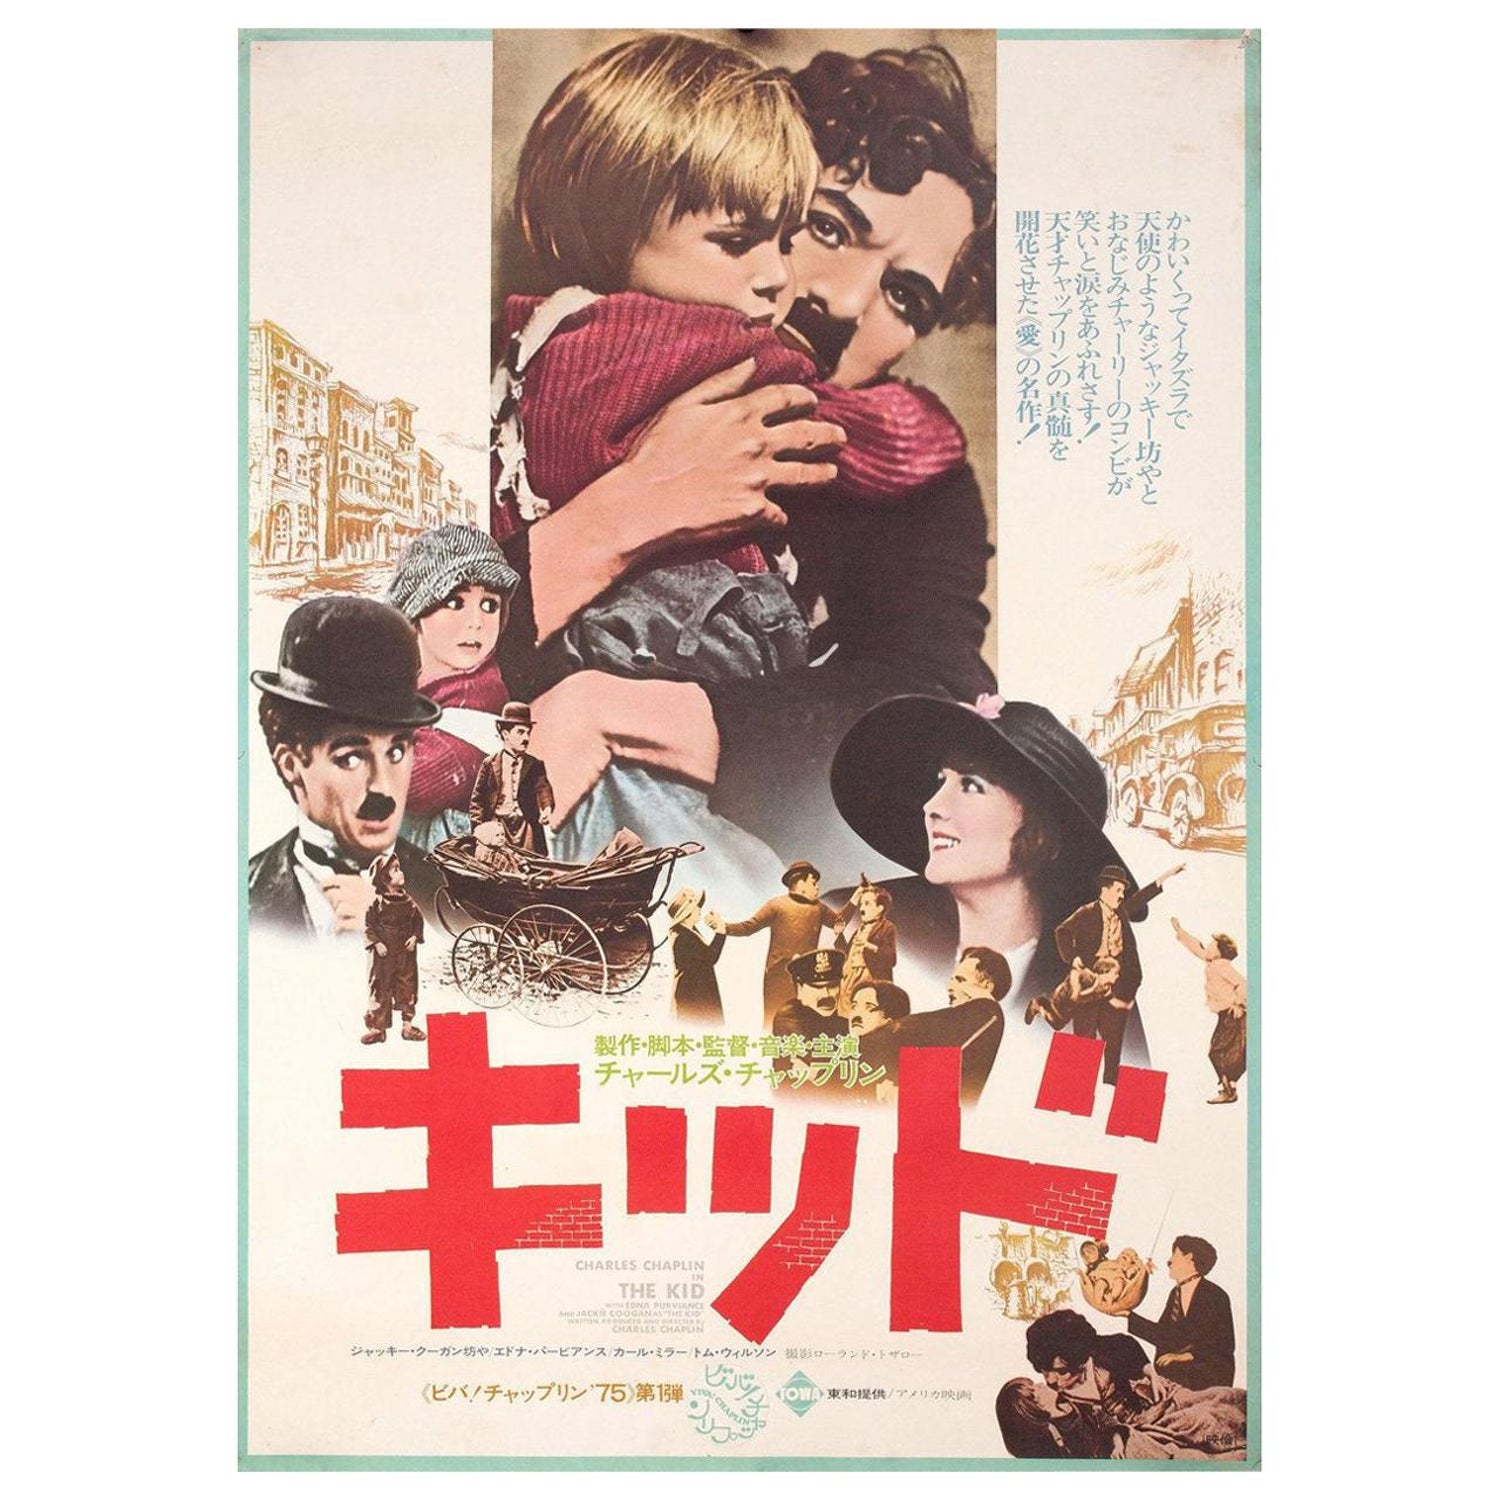 The Kid R1975 Japanese B2 Film Poster For Sale At 1stdibs